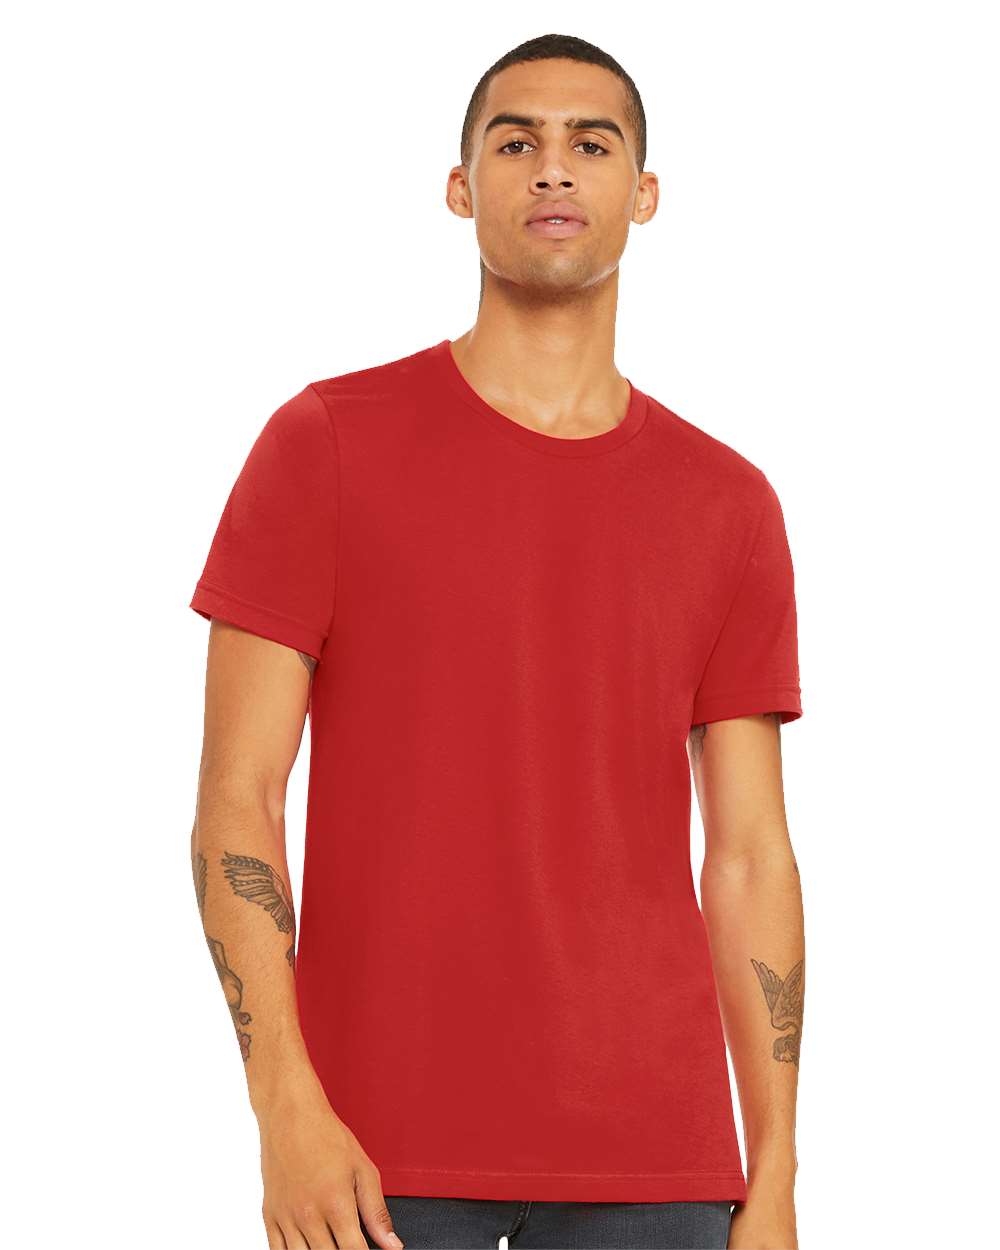 BELLA + CANVAS - Jersey Tee - 3001 - Red